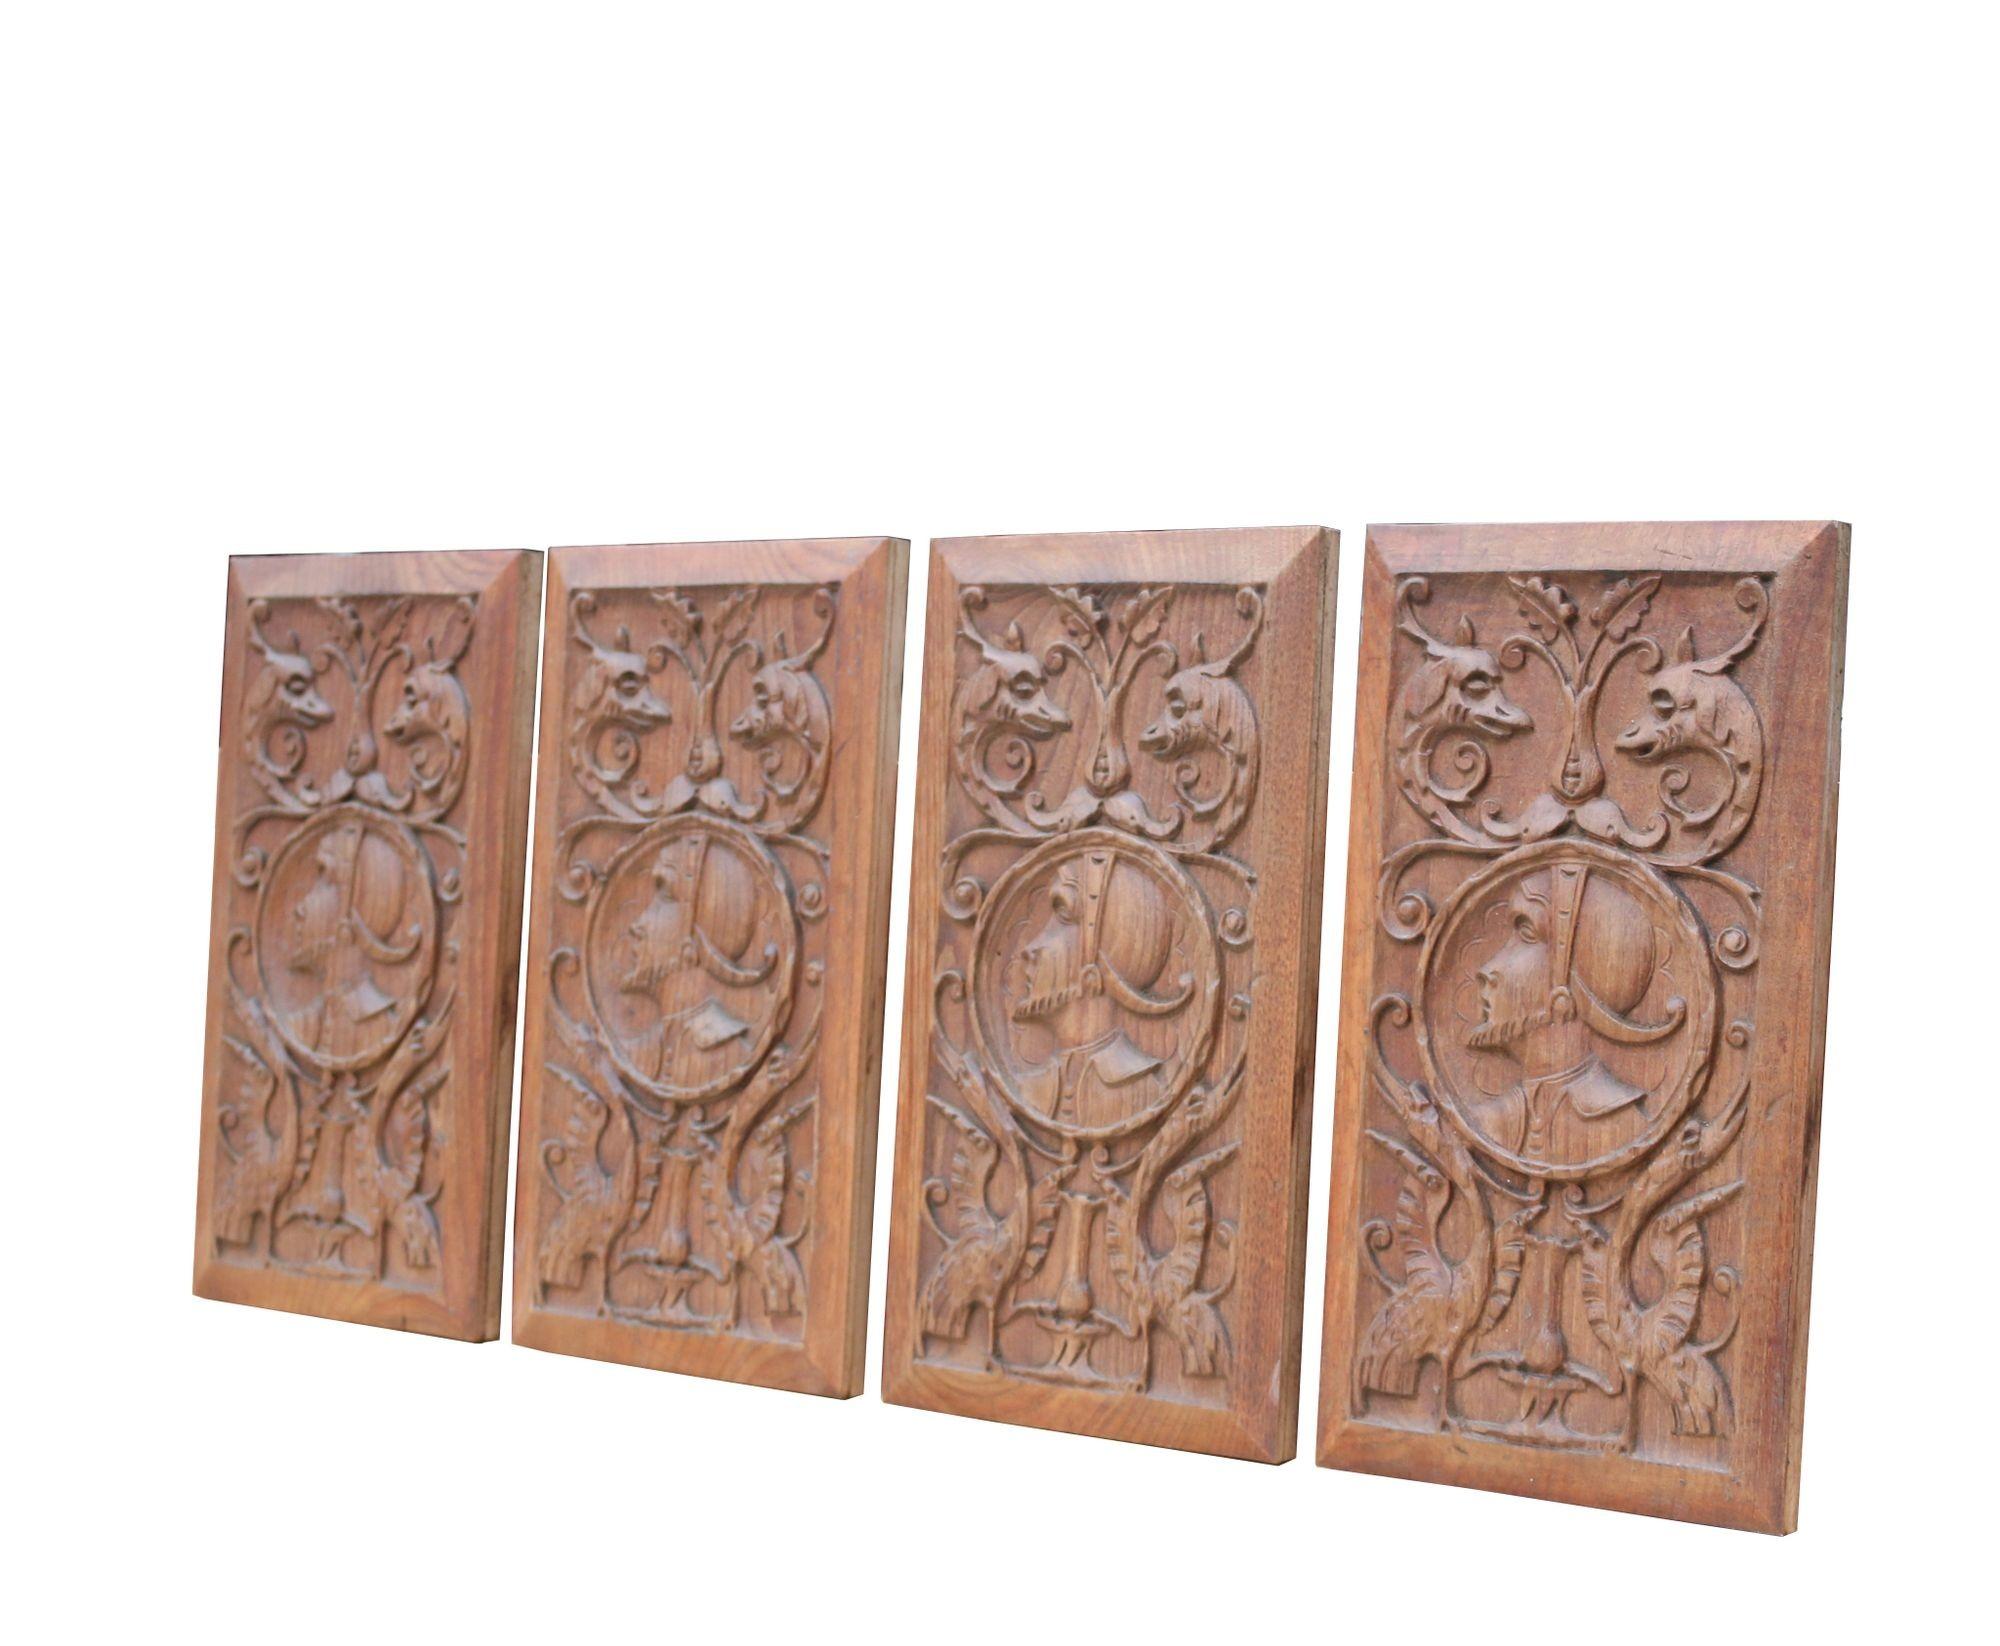 Hand-Carved Four Antique Carved Oak Panels Depicting Figures in Period Costume